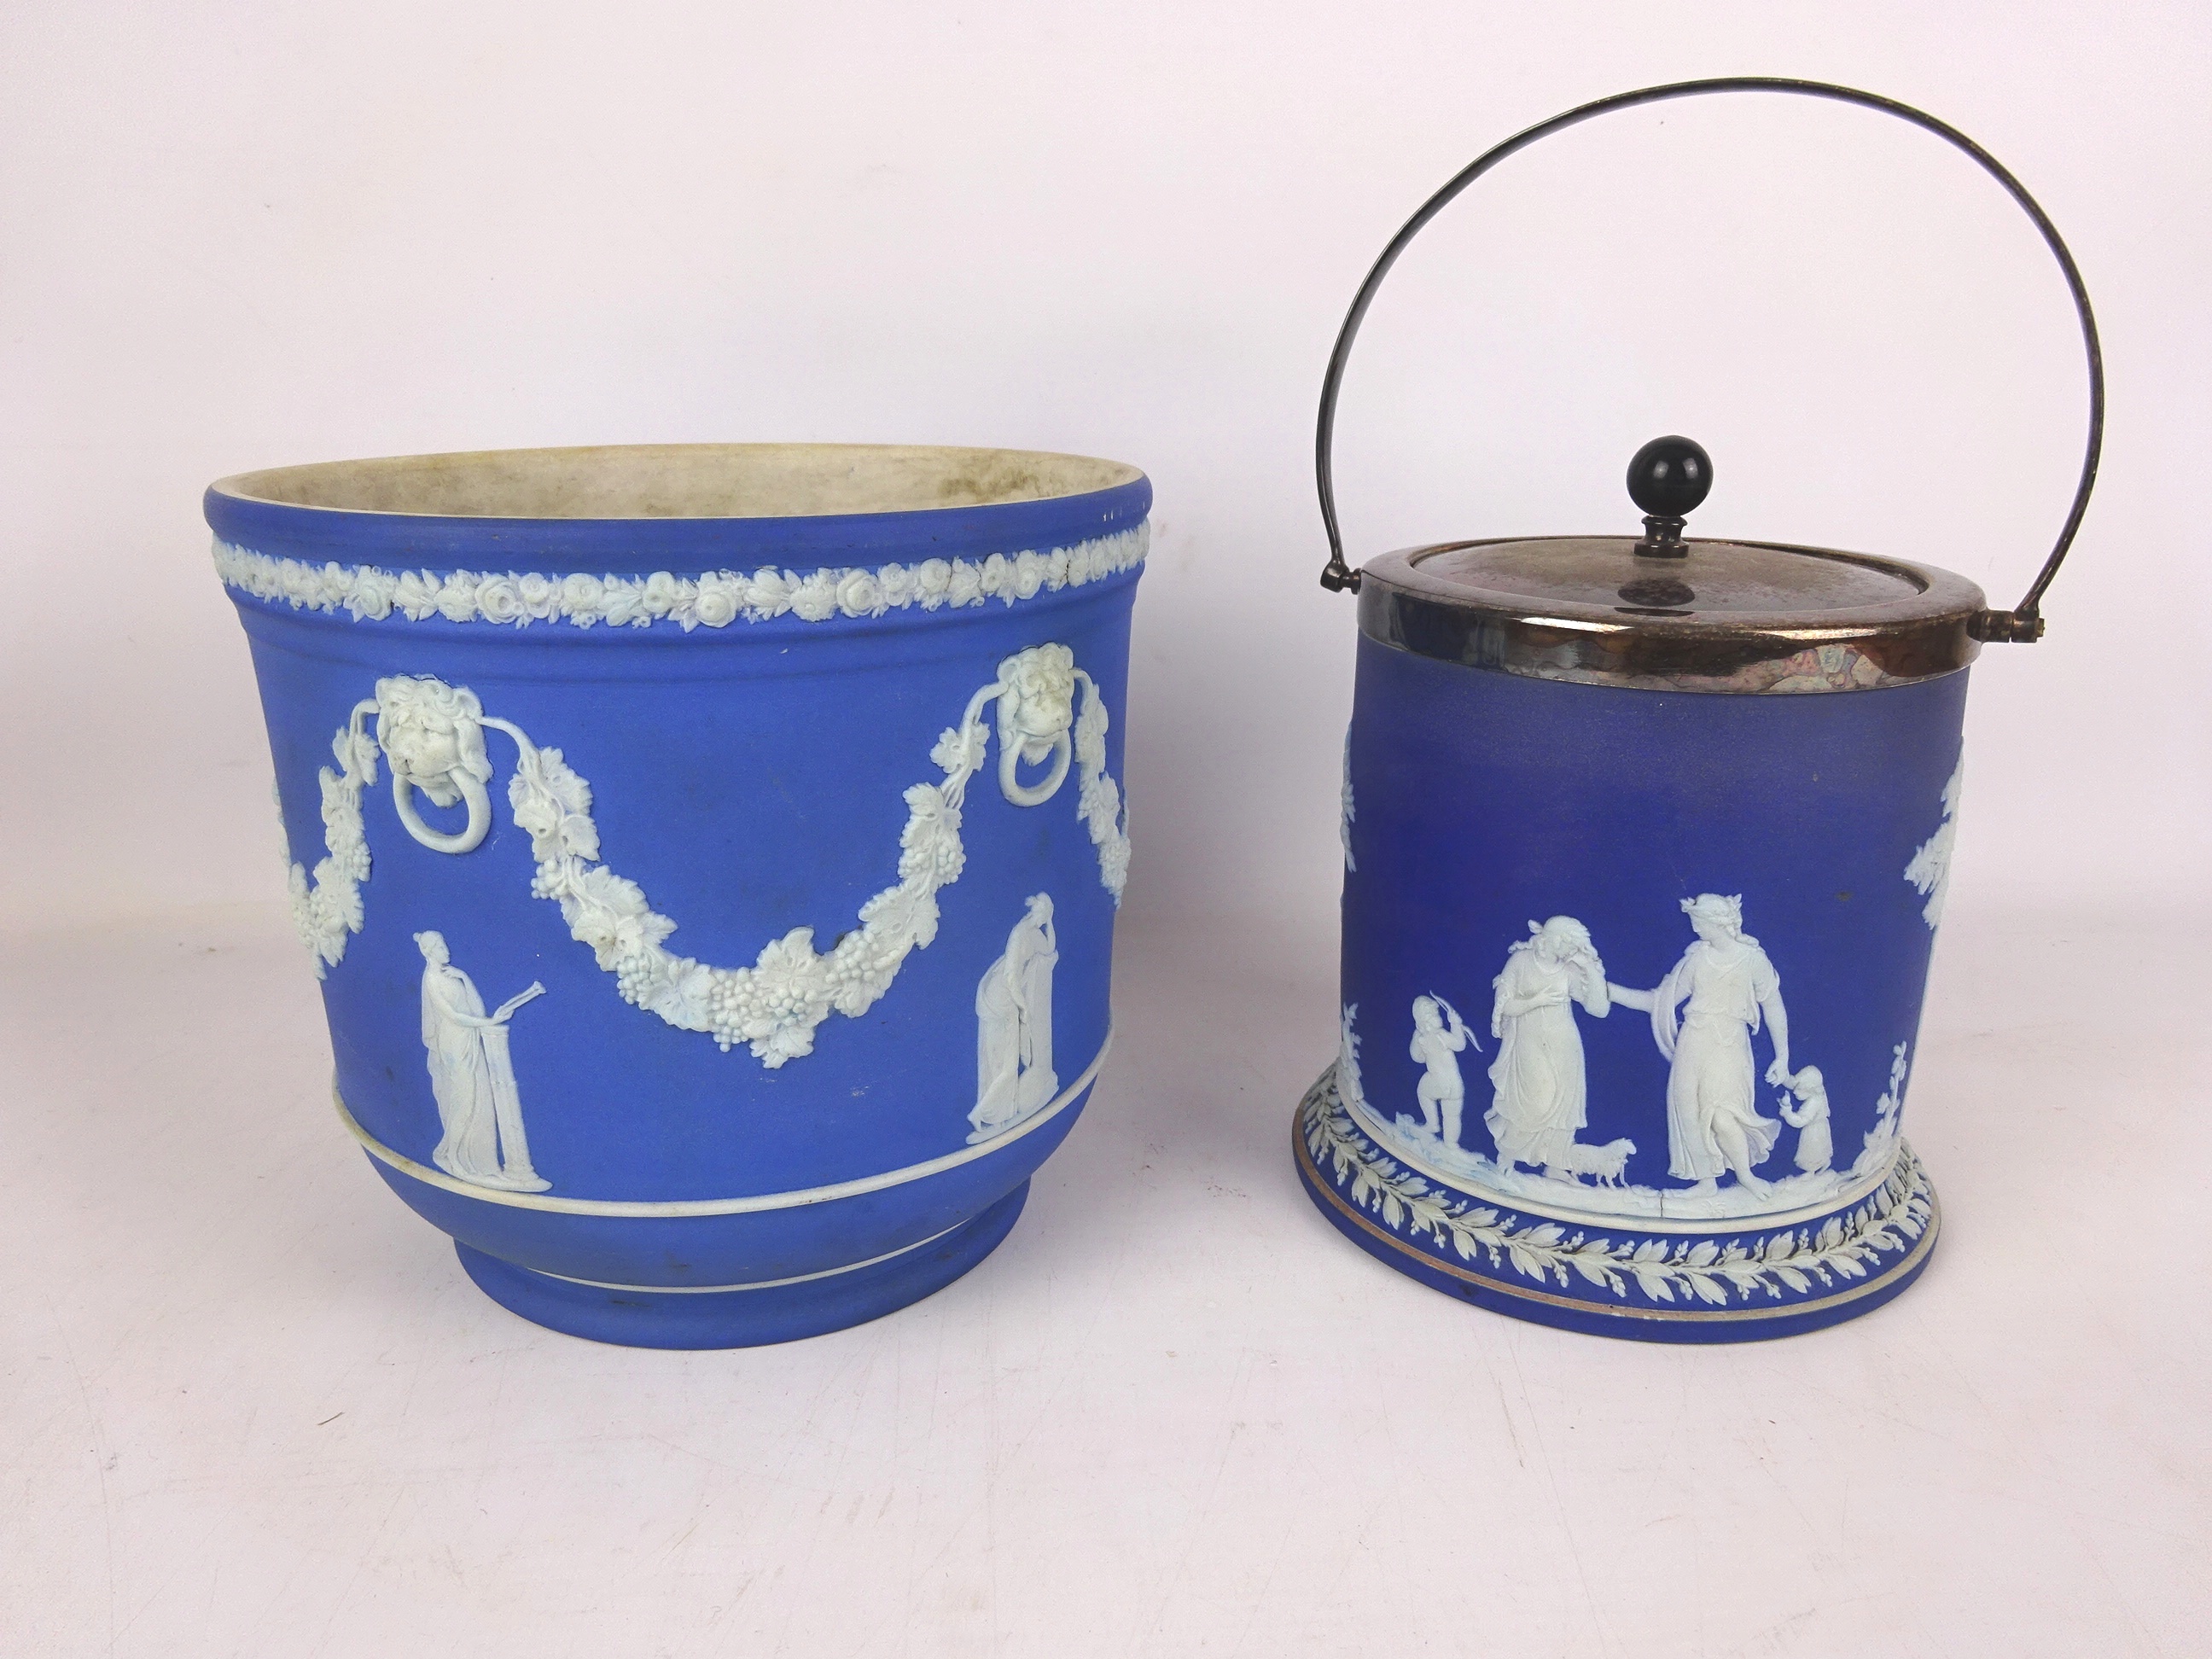 Wedgwood blue Jasper ware jardiniere & a similar biscuit barrel with EPNS cover and handle (2)